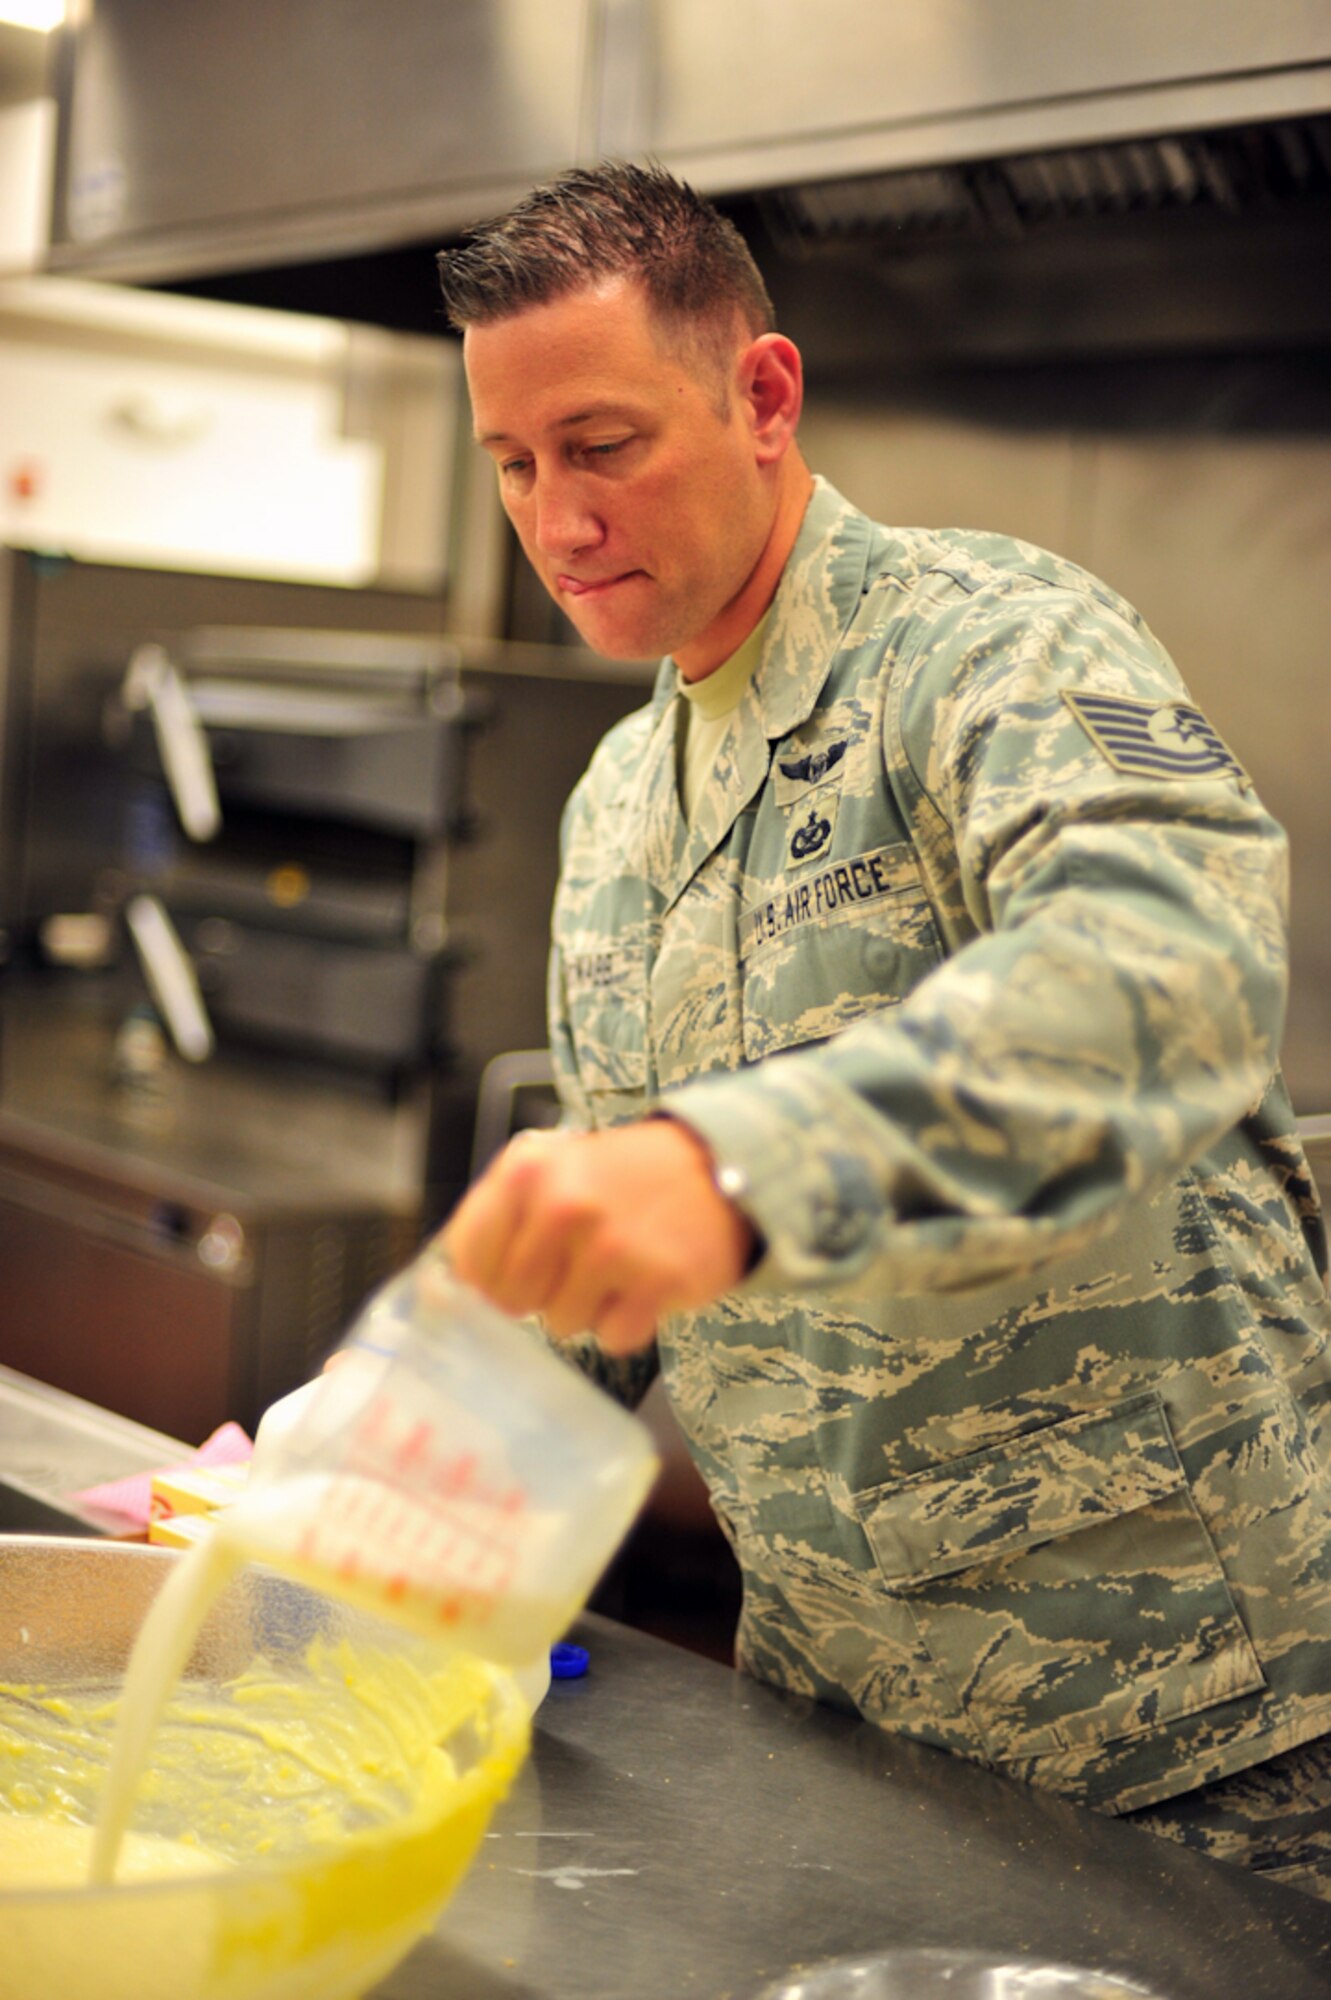 BUCKLEY AIR FORCE BASE, Colo. --  Tech. Sgt. Scott McNabb, 460th Space Wing Public Affairs, prepares vanilla pudding for the pie filling June 30. 50 pies were eaten during the July 1 pie-eating contest for prizes. (U.S. Air Force photo by Staff Sgt. Kathrine McDowell)